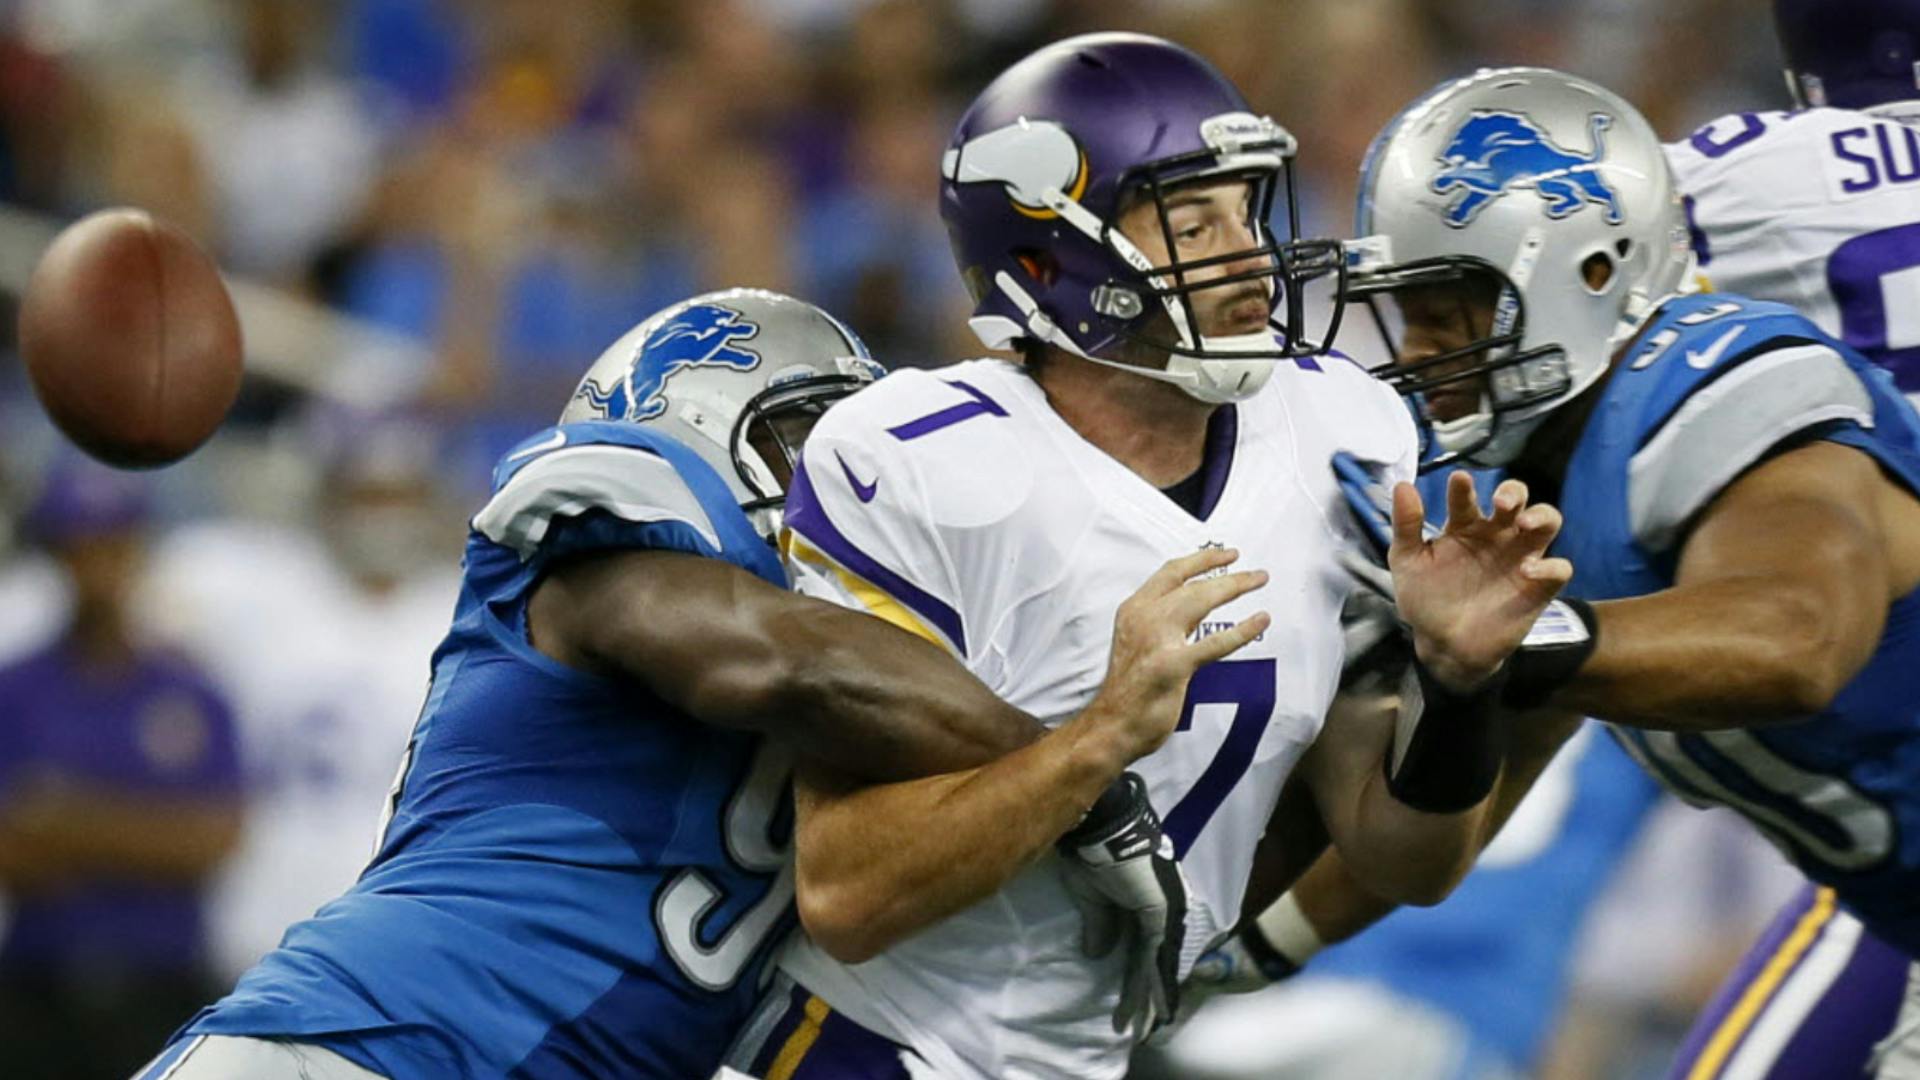 Vikings coach Leslie Frazier and quarterback Christian Ponder talked about the team's 34-24 loss to the Detroit Lions on Sunday.